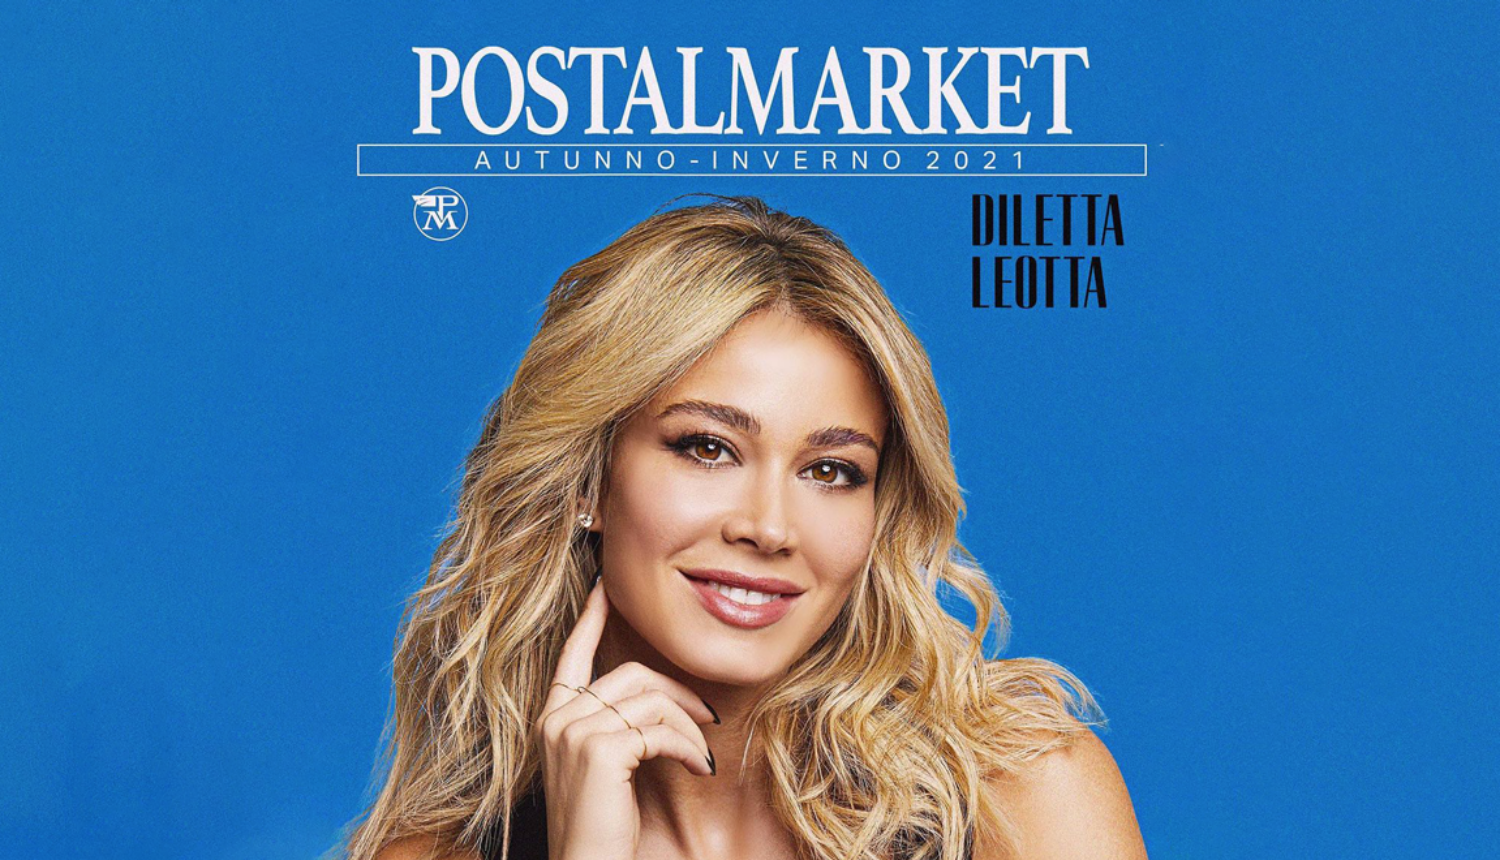 We have joined the new Postalmarket project